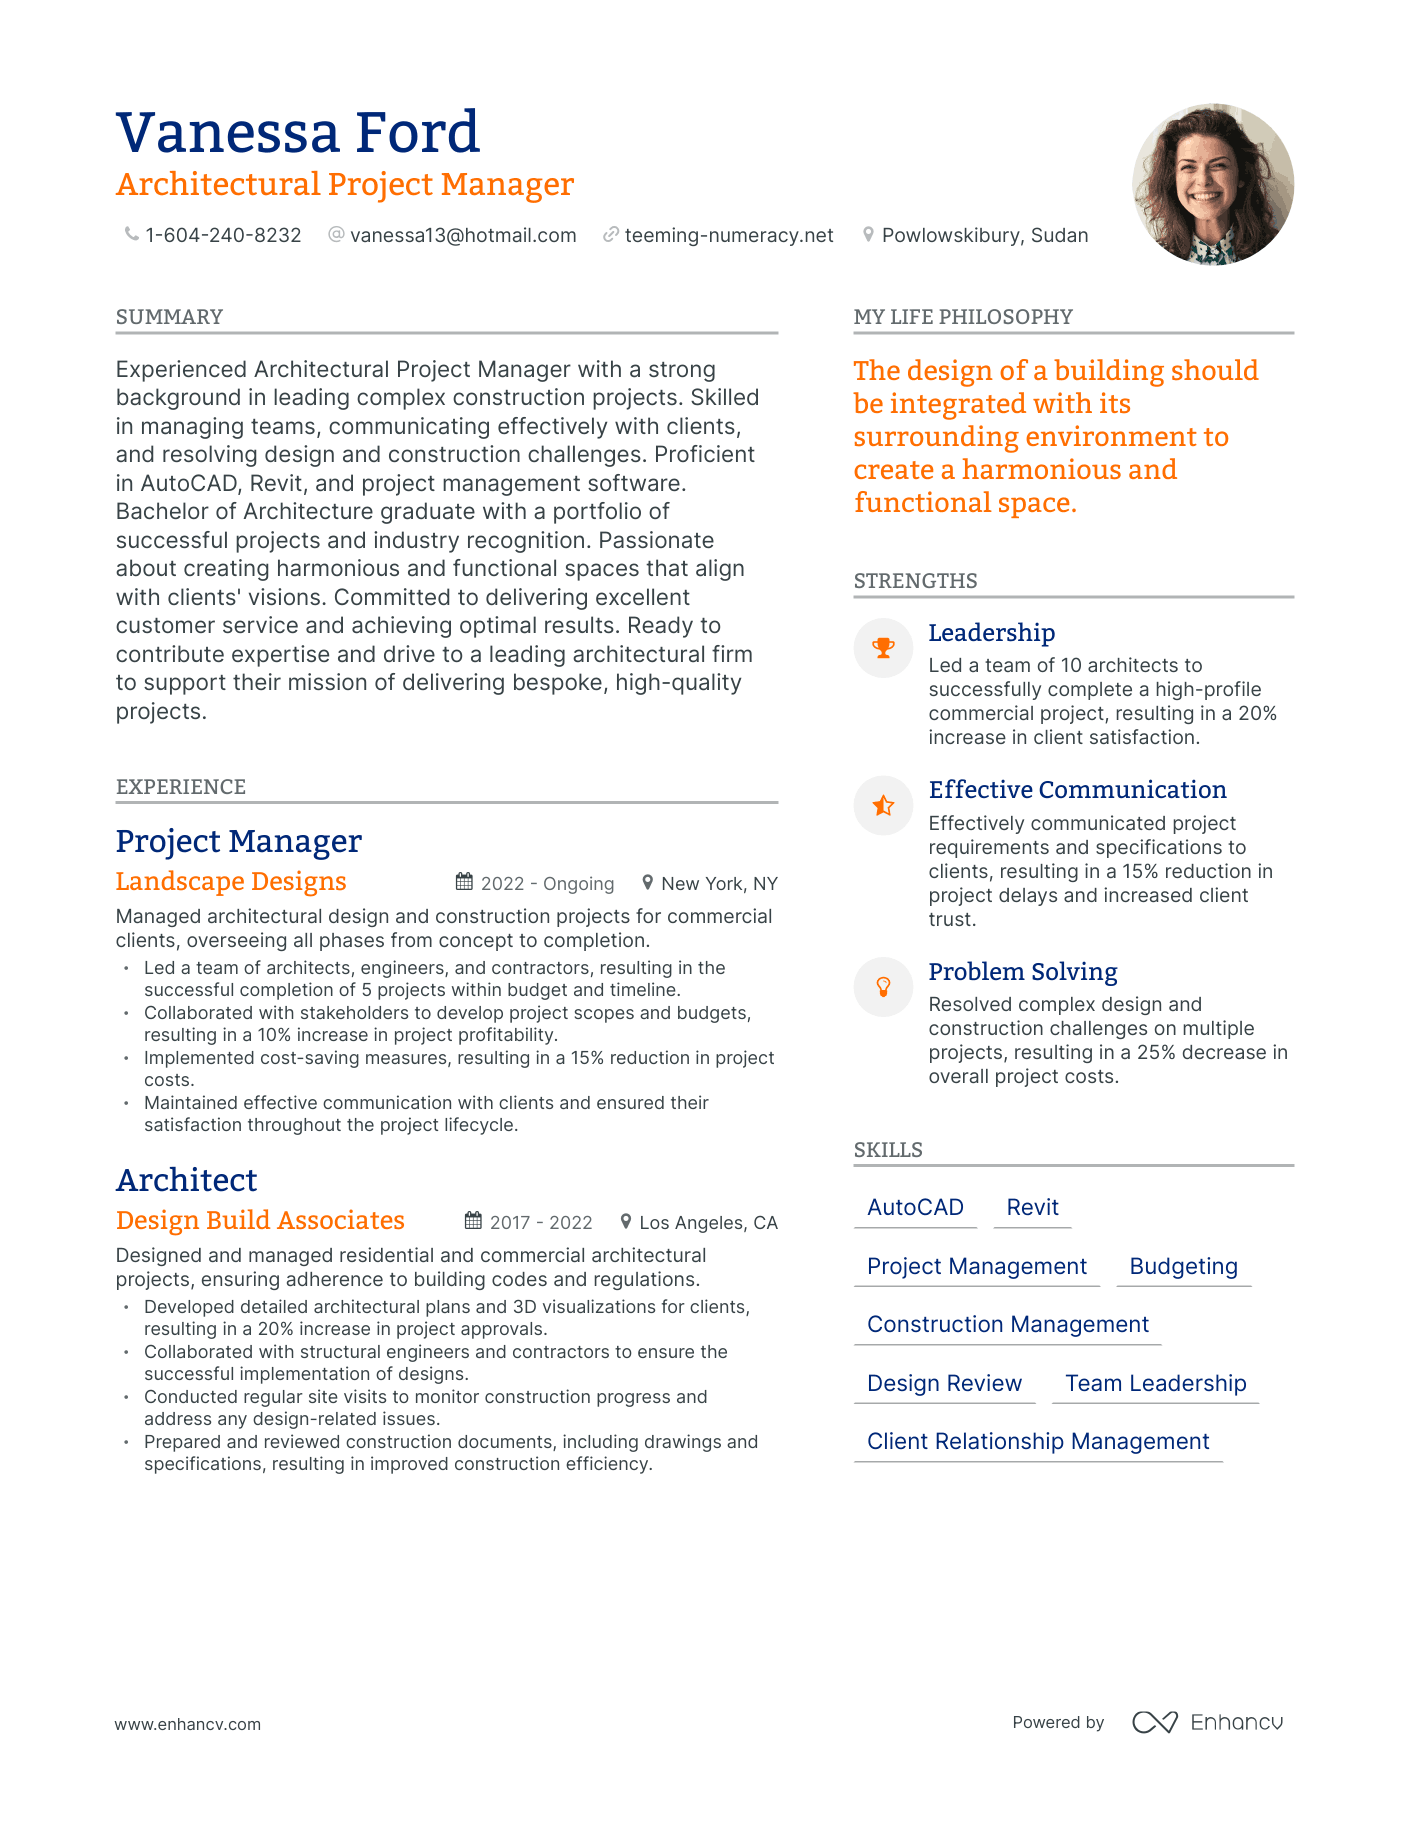 Architectural Project Manager resume example